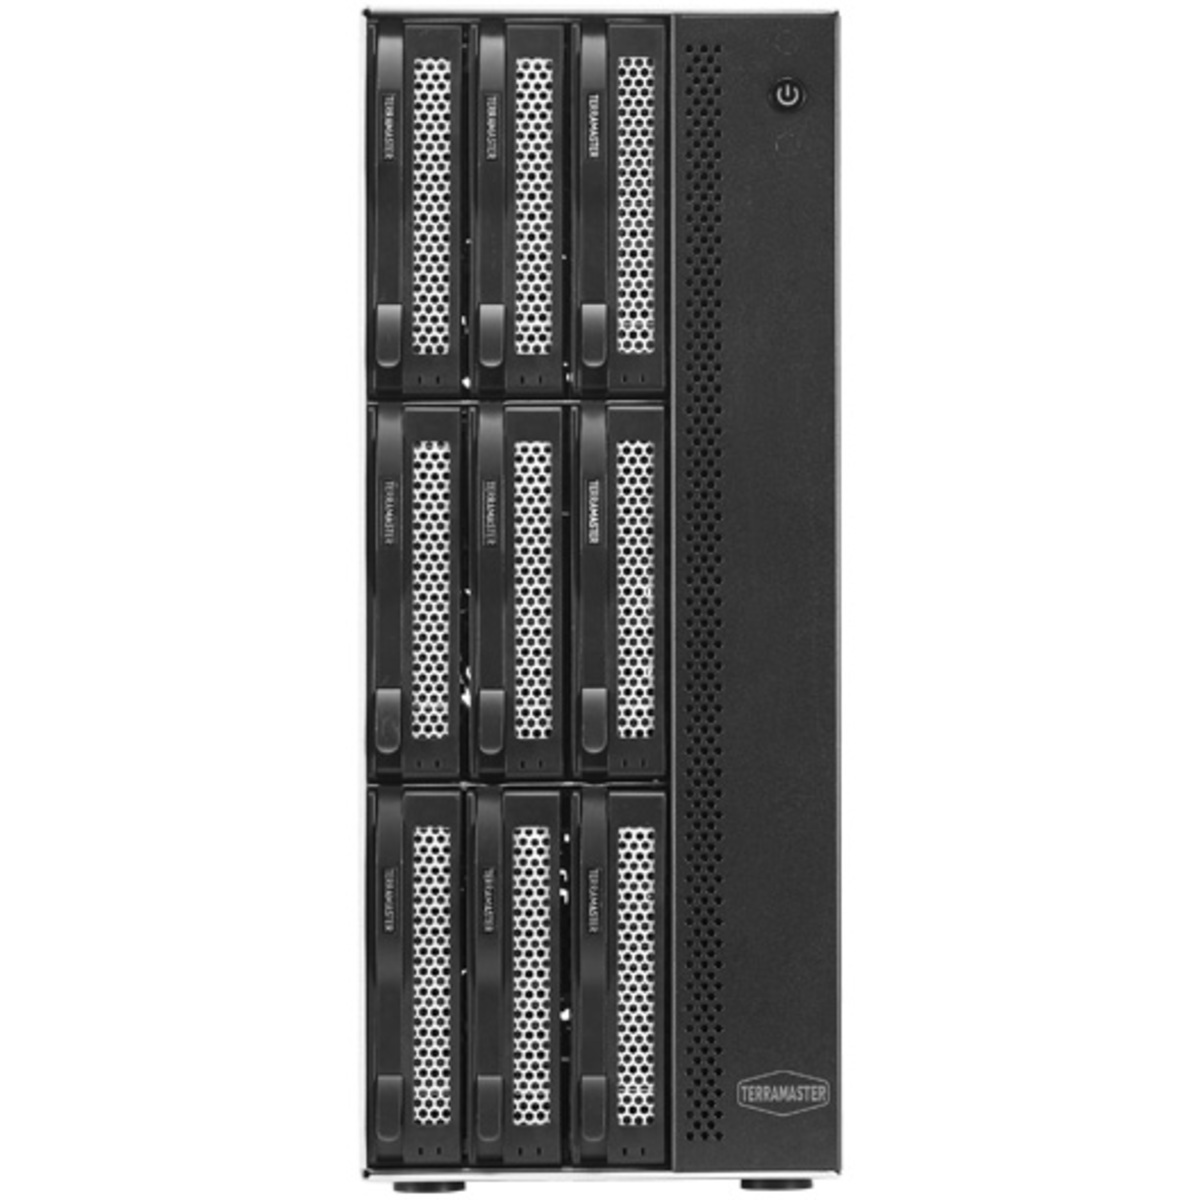 TerraMaster T9-450 16tb 9-Bay Desktop Multimedia / Power User / Business NAS - Network Attached Storage Device 8x2tb Samsung 870 QVO MZ-77Q2T0 2.5 560/530MB/s SATA 6Gb/s SSD CONSUMER Class Drives Installed - Burn-In Tested T9-450